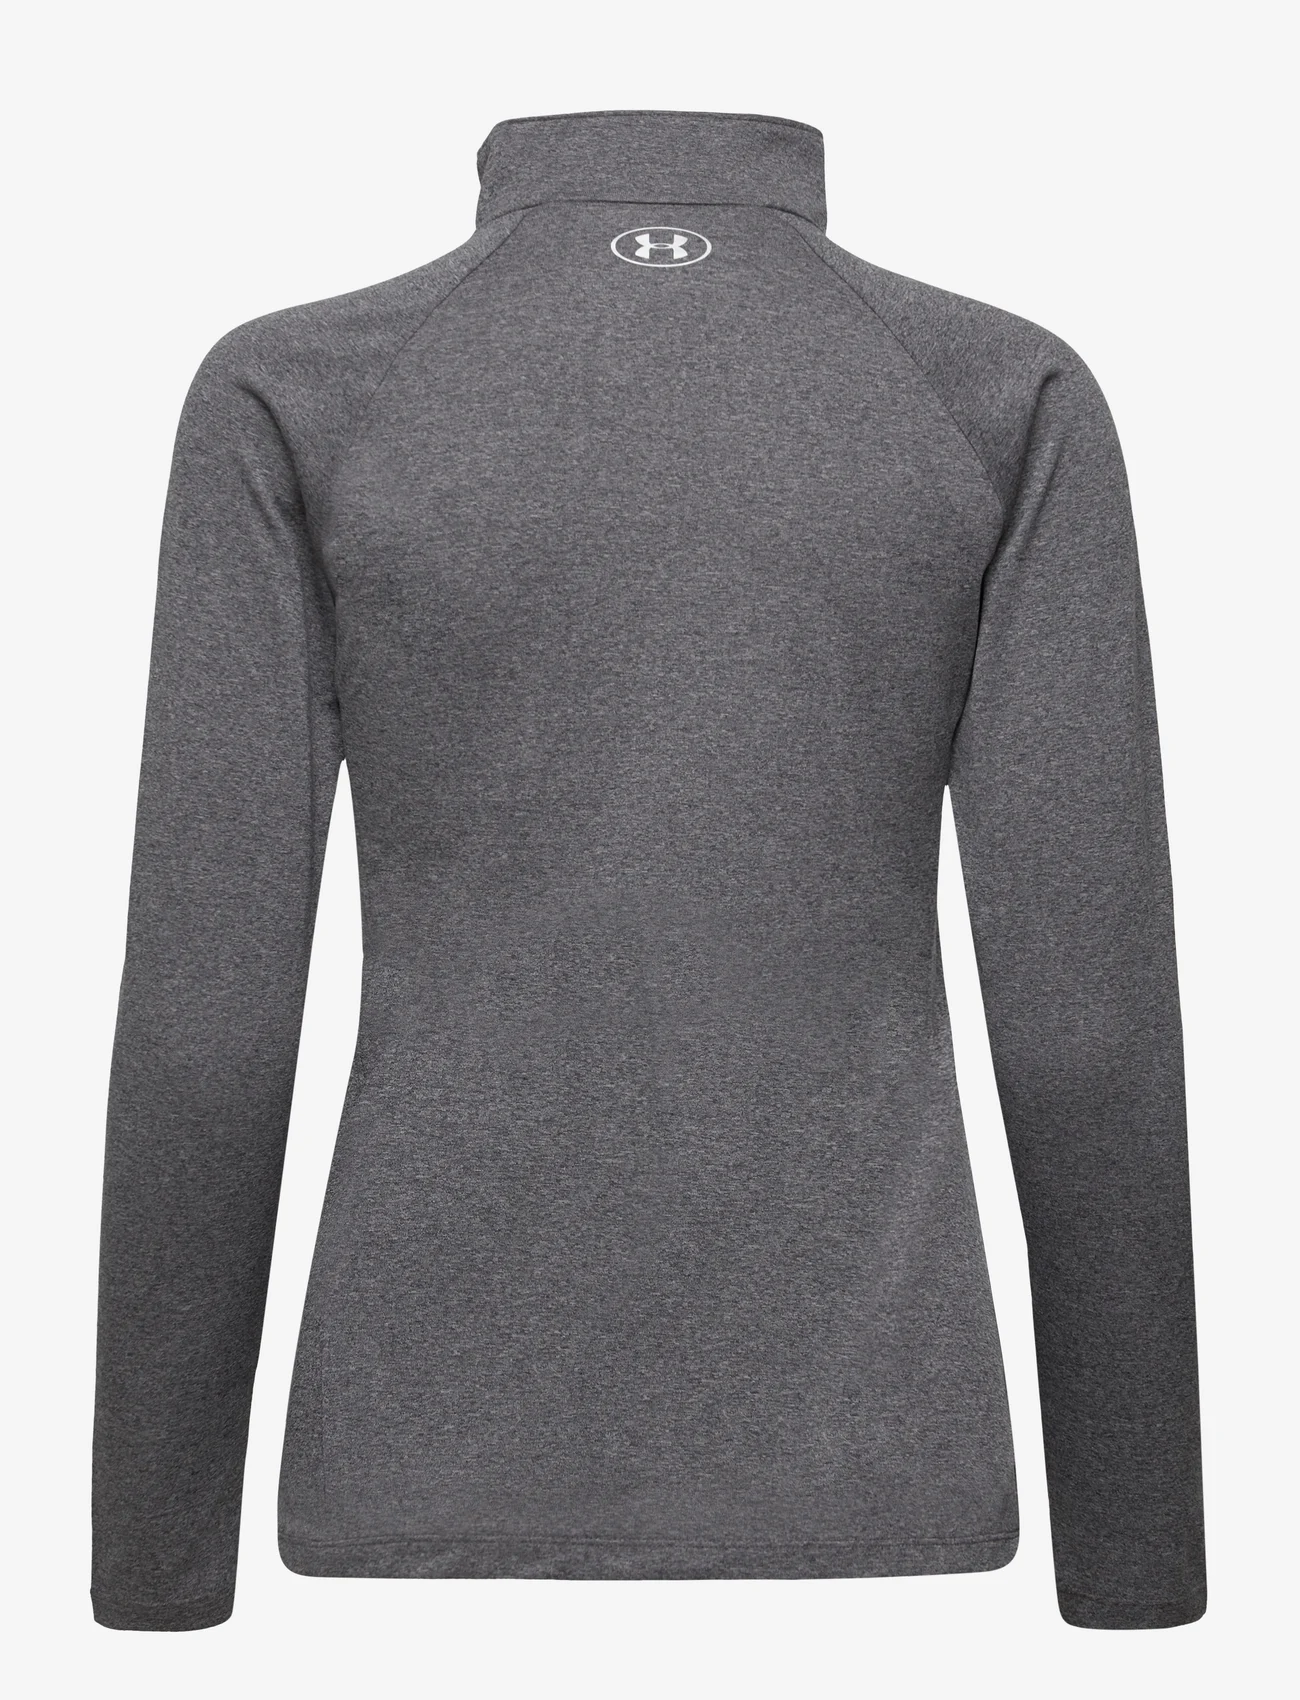 Under Armour - Tech 1/2 Zip - Solid - carbon heather - 1